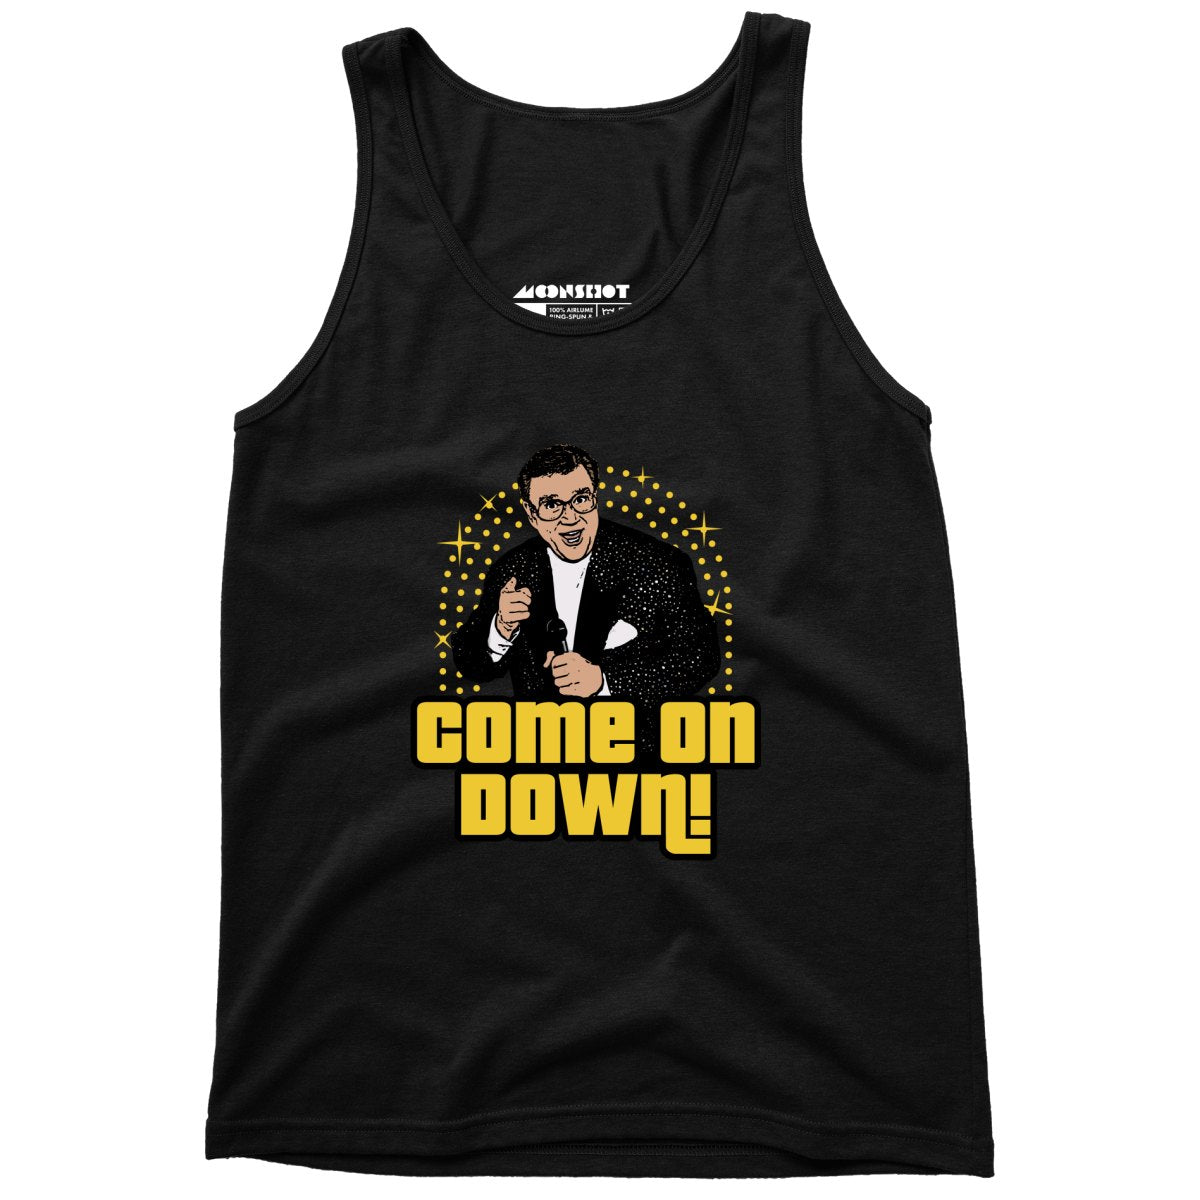 Come On Down - Unisex Tank Top